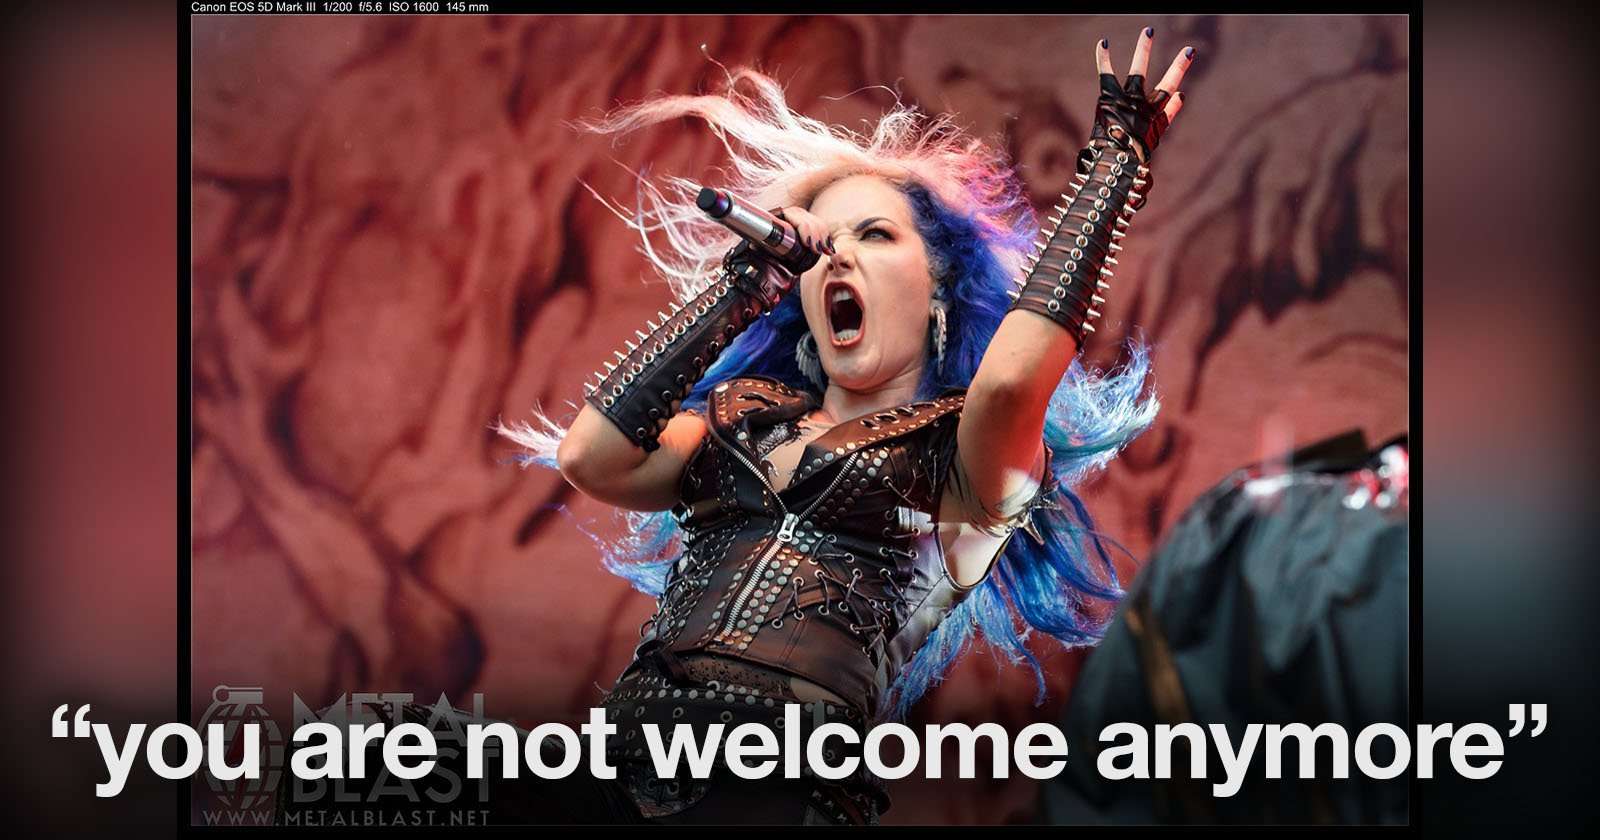 image for How I Got Banned from Photographing the Band Arch Enemy